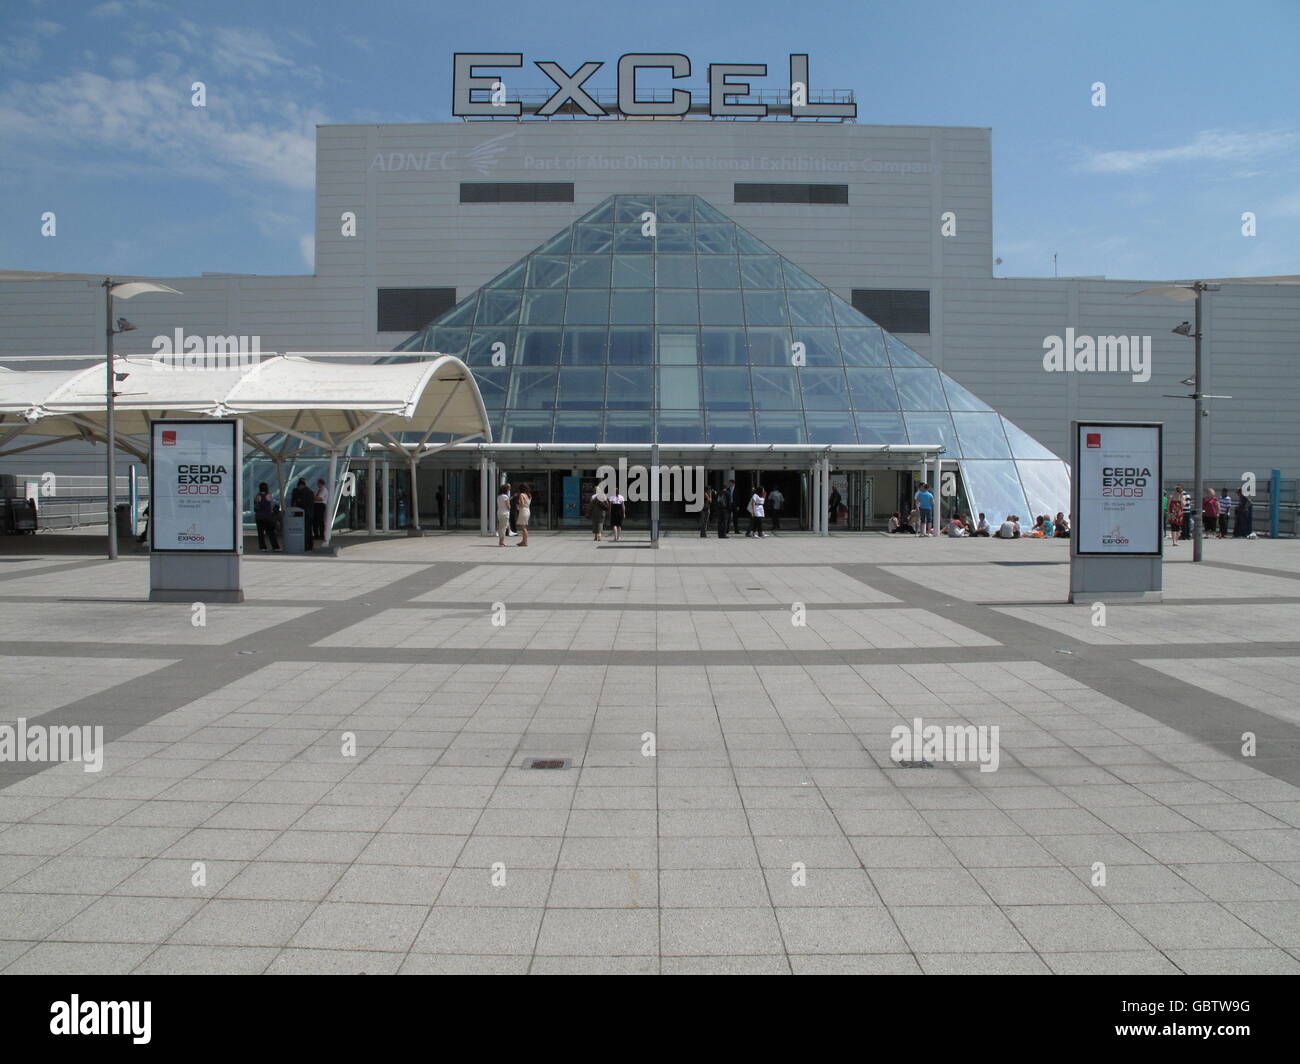 The Excel centre in Docklands, East London. Stock Photo